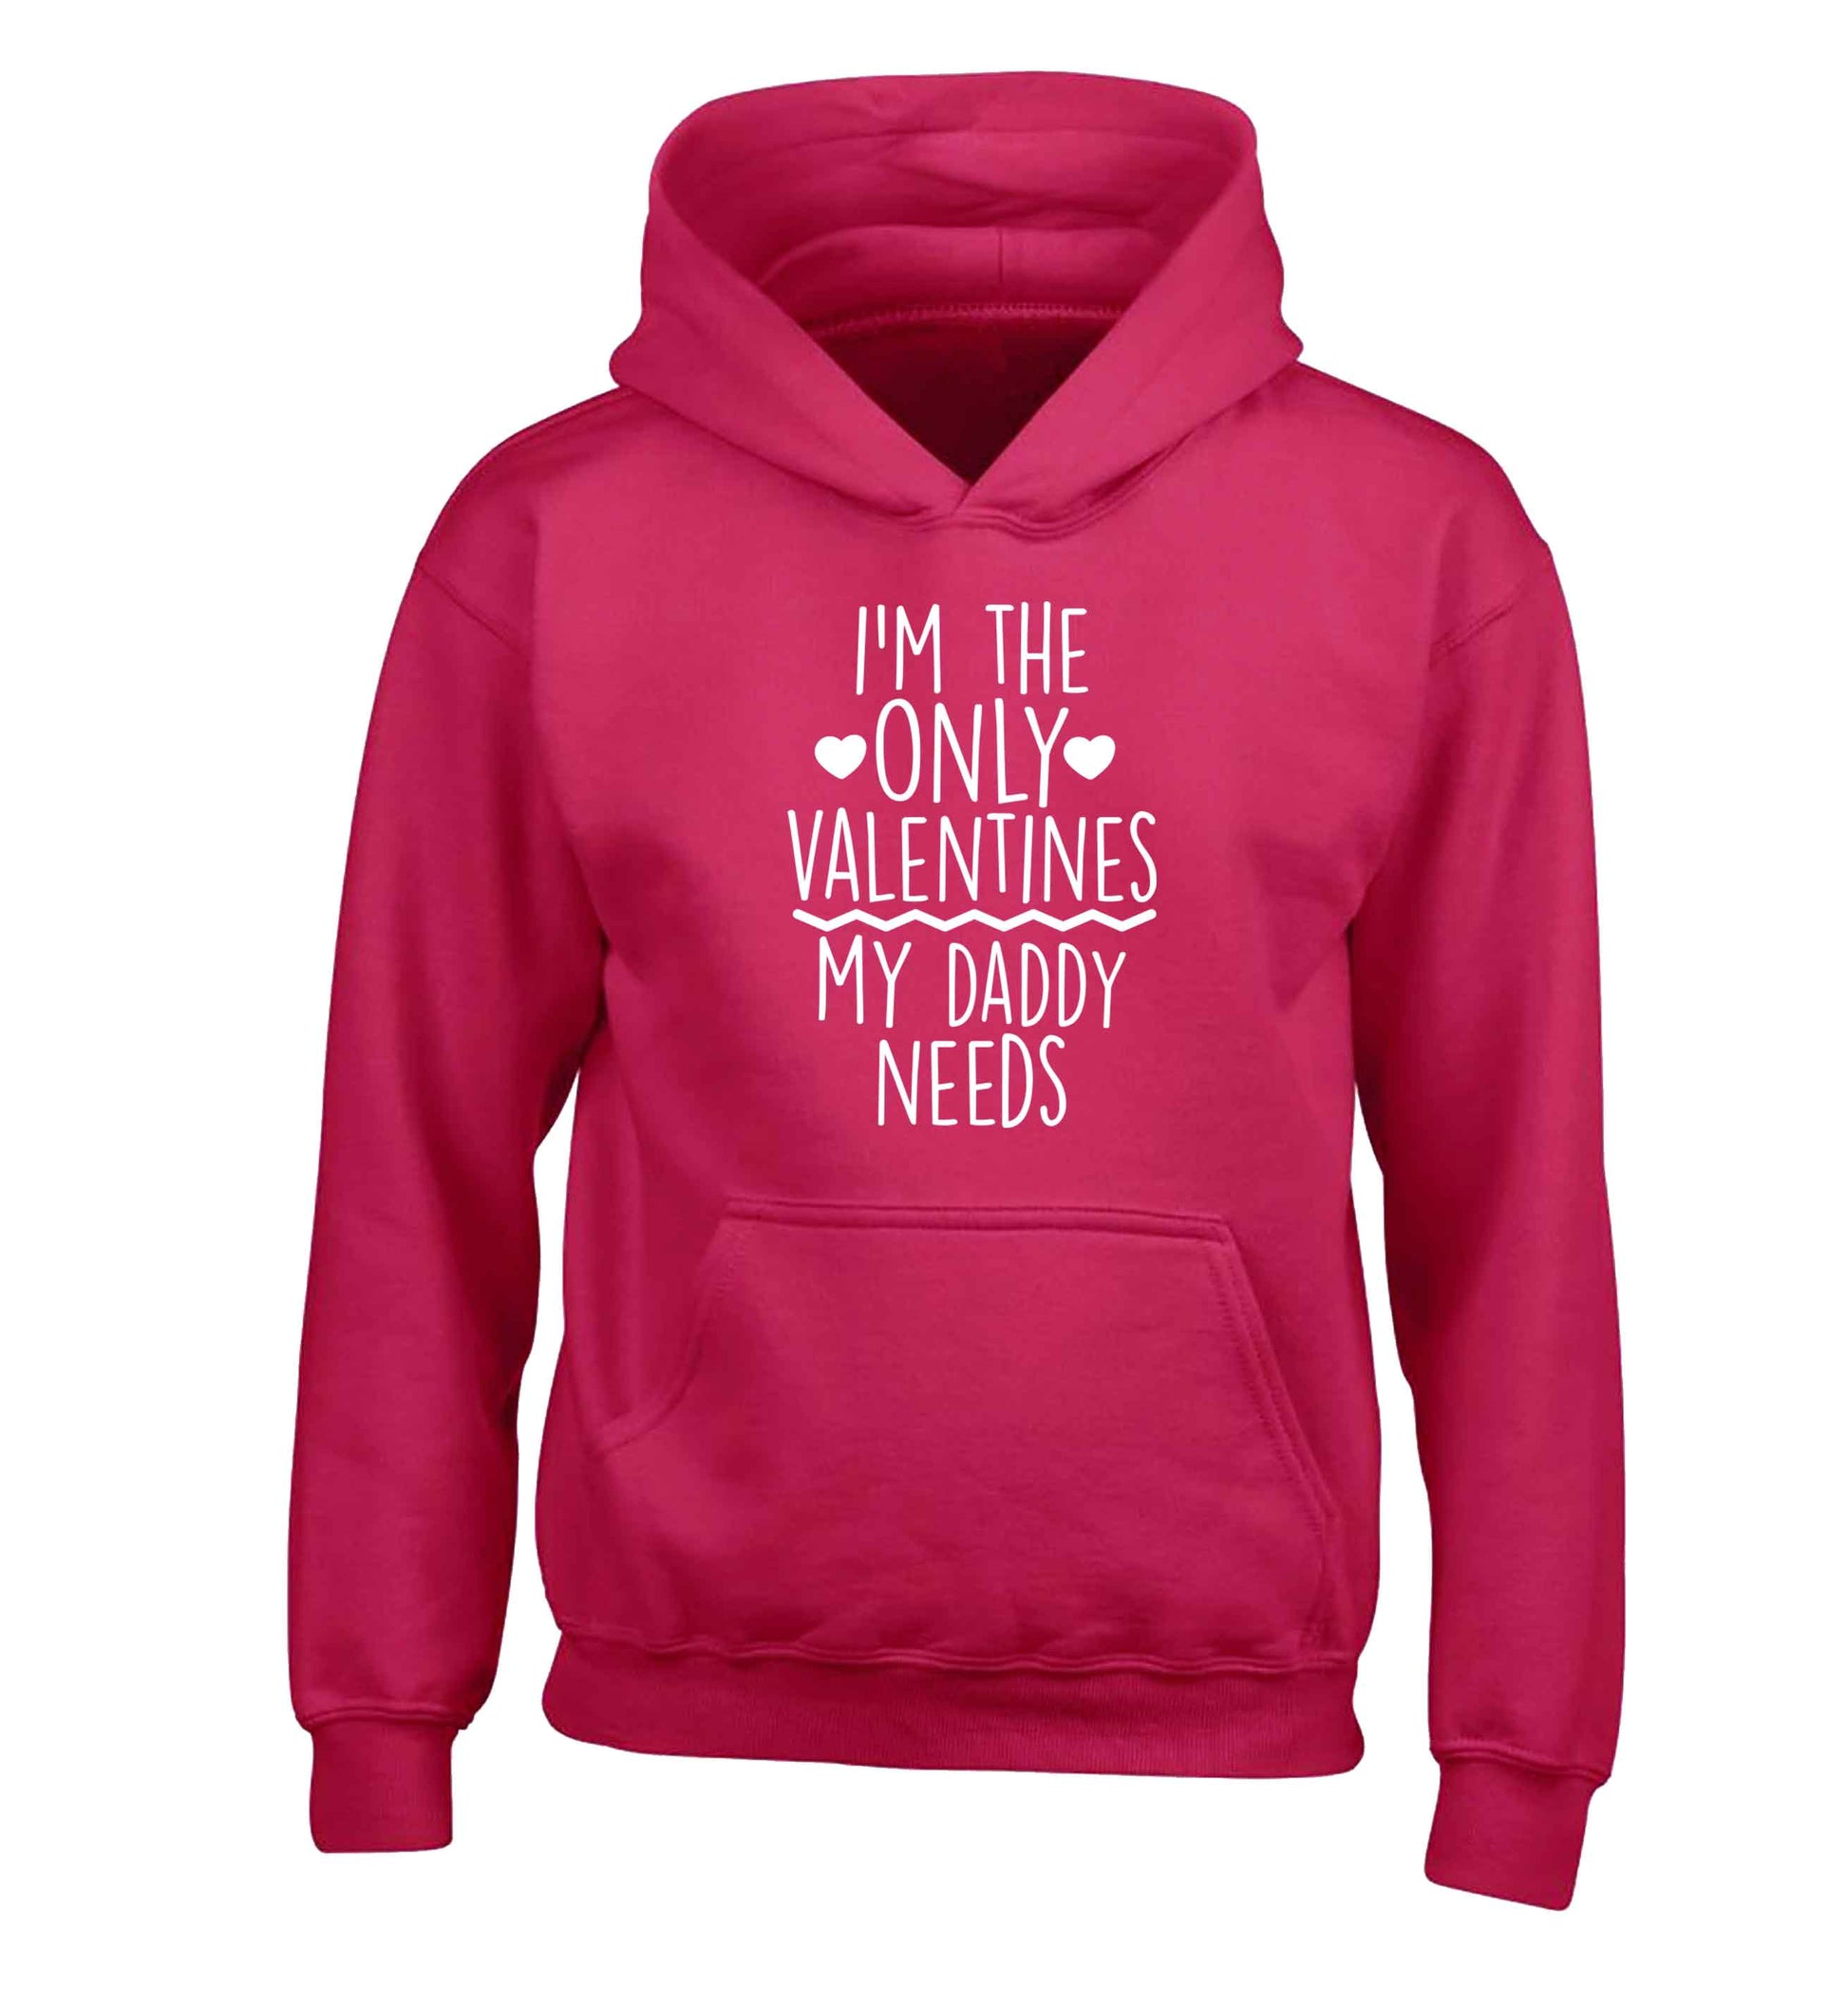 I'm the only valentines my daddy needs children's pink hoodie 12-13 Years